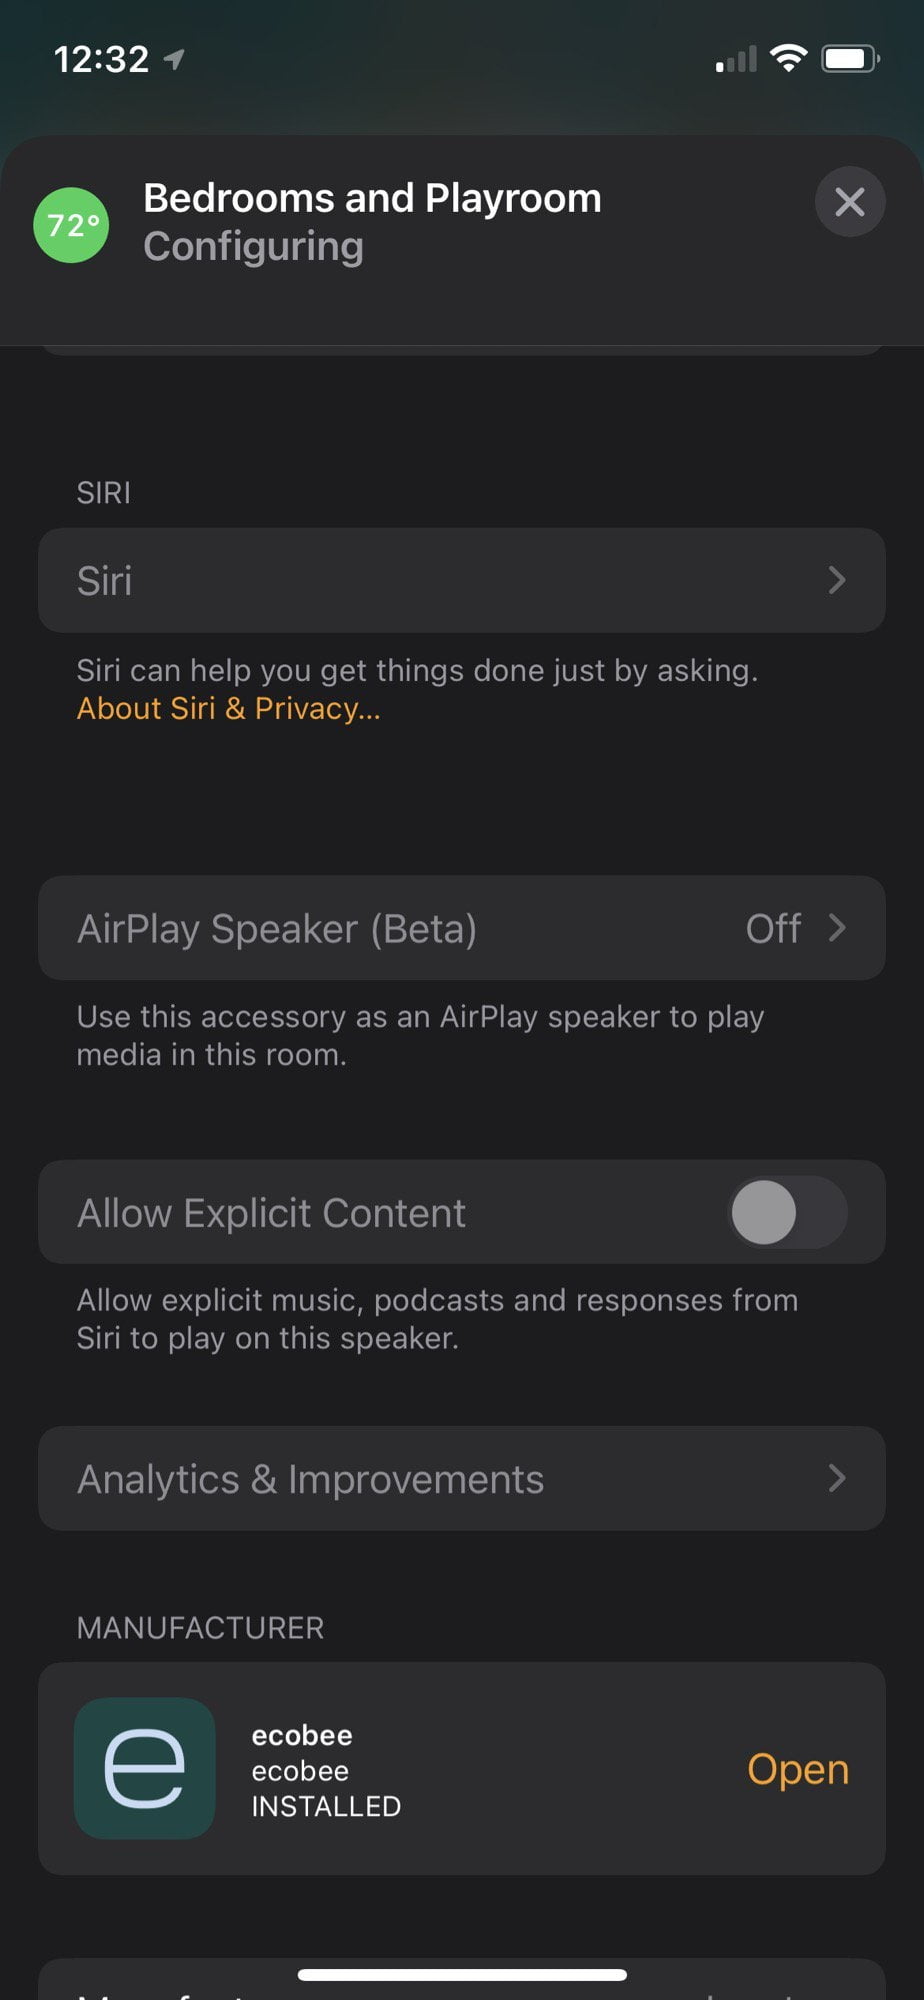 Ecobee has been updated but are Siri and airplay in